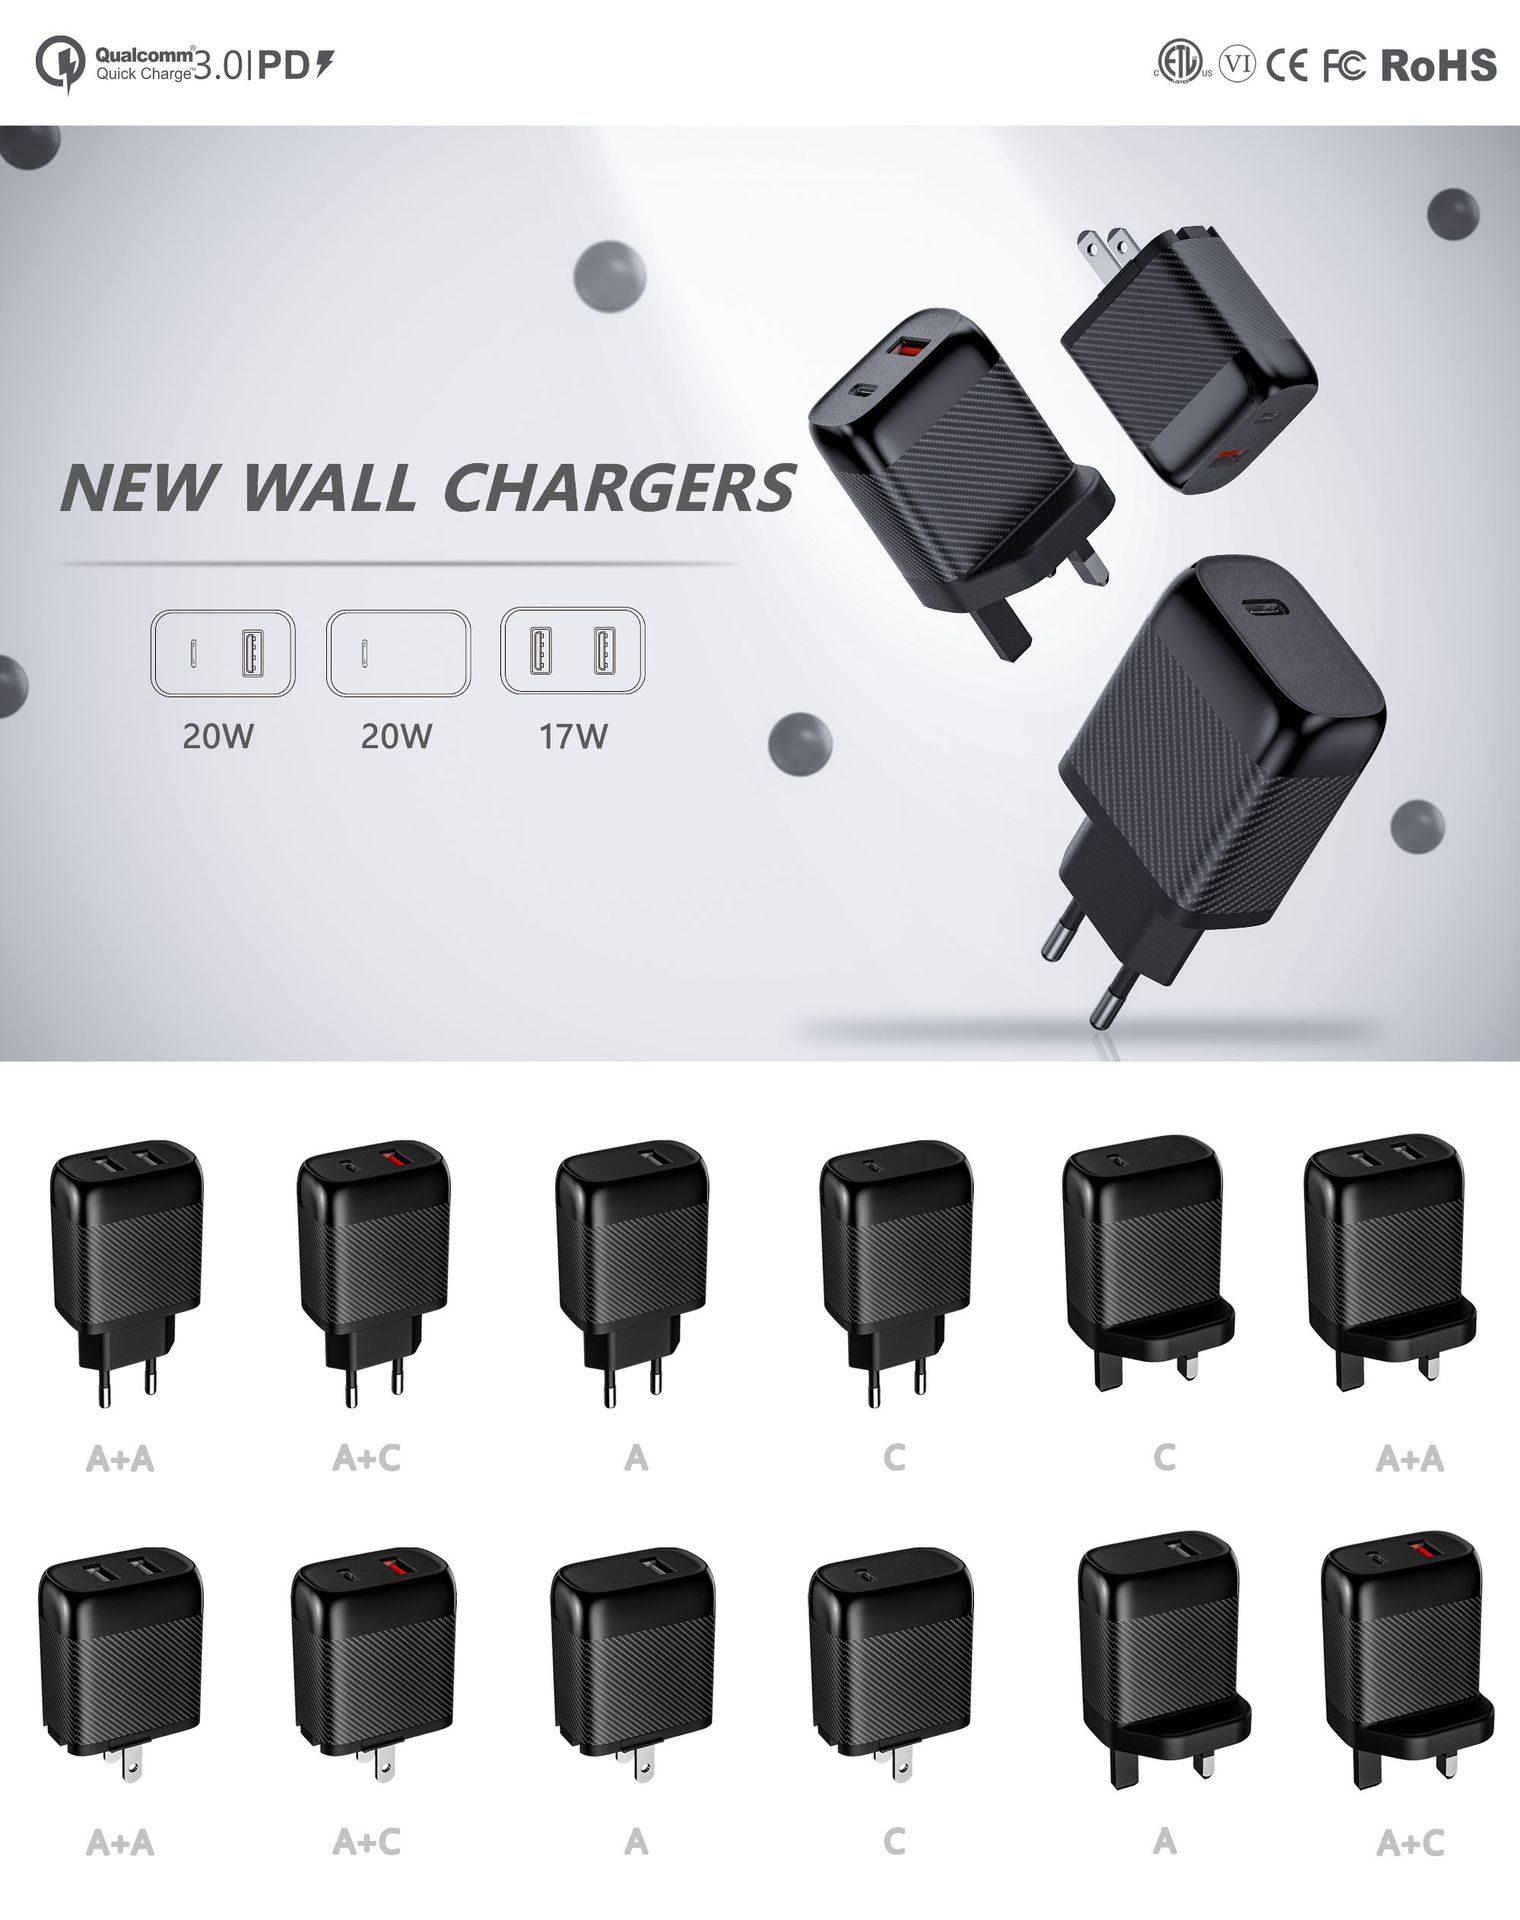 Pacolipower PD charger design customed